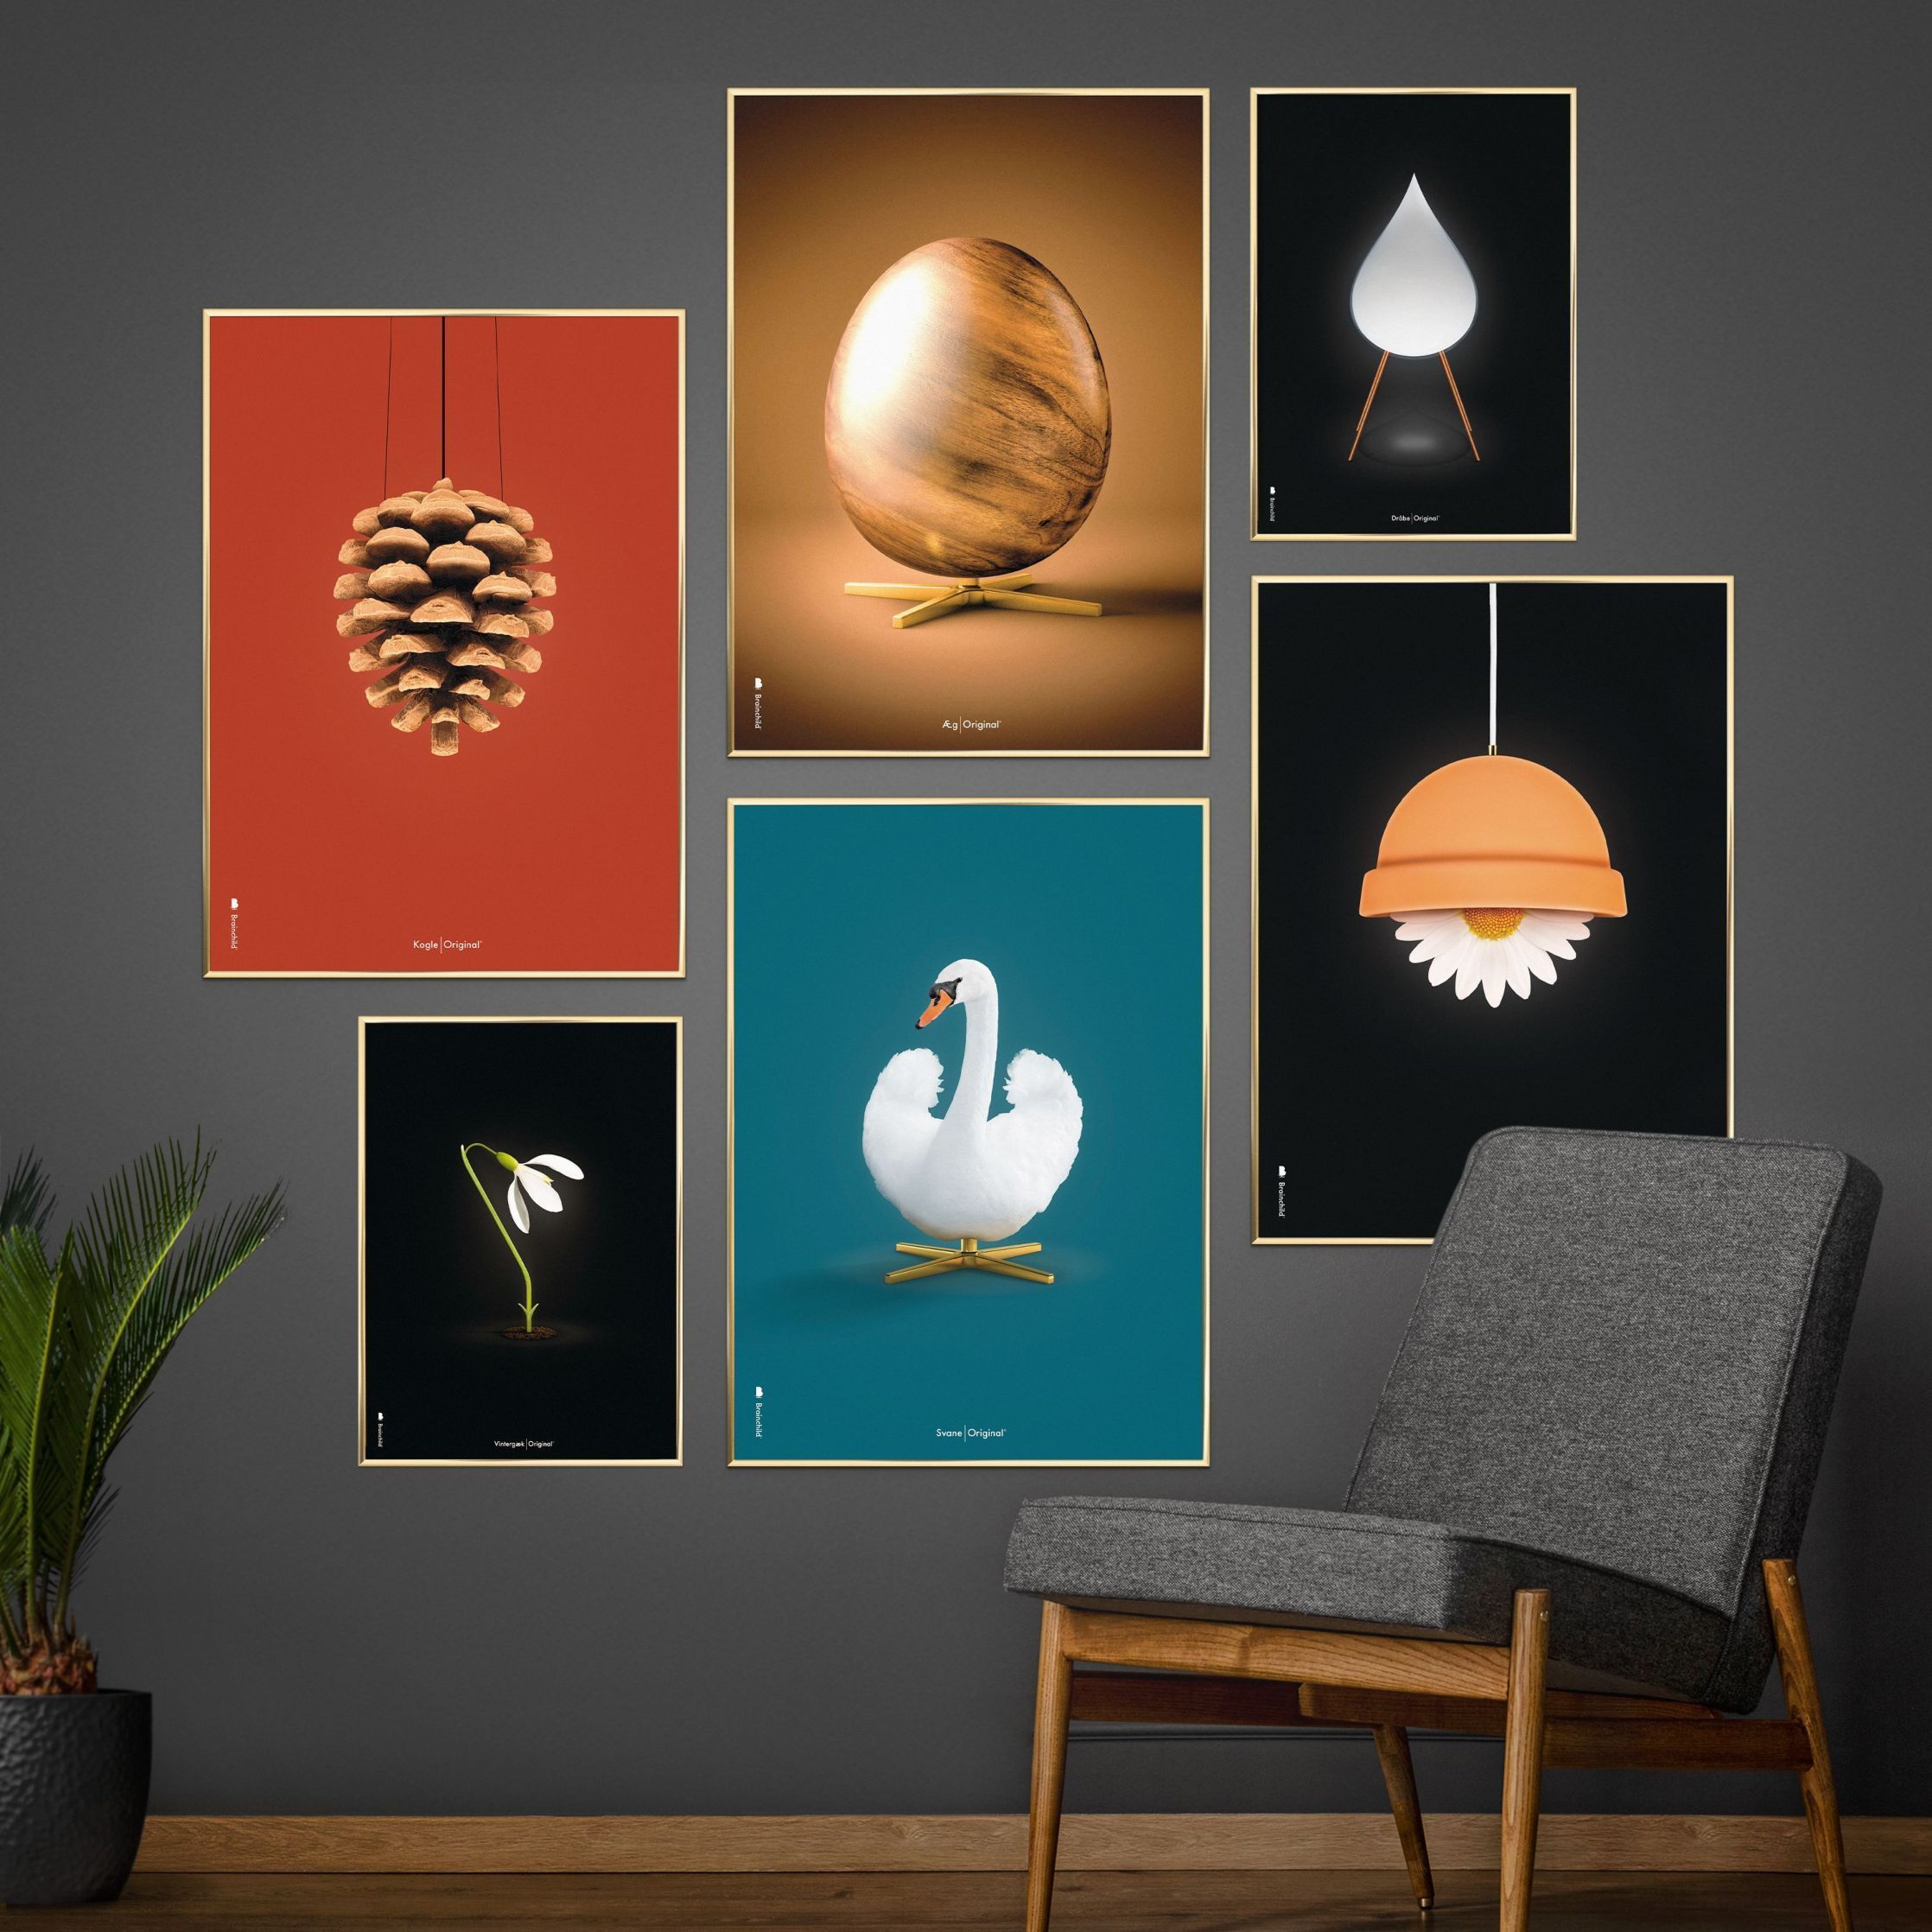 Brainchild Pine Cone Classic Poster, Frame Made Of Light Wood 30x40 Cm, Red Background